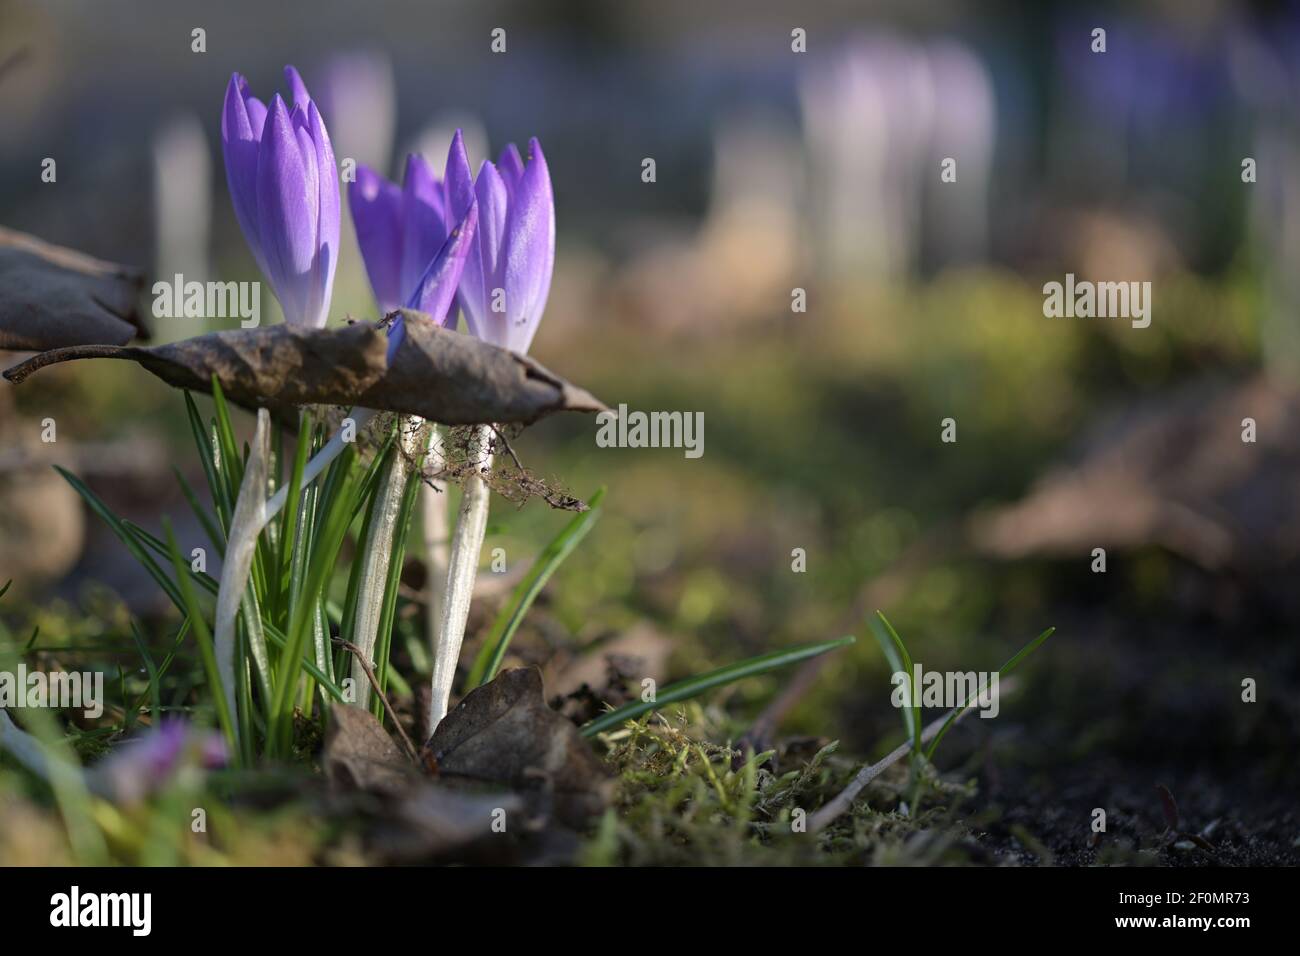 Purple blue crocus flowers growing through a dry leaf from the last year, metaphor for the power of nature overcoming old and creating new, copy space Stock Photo